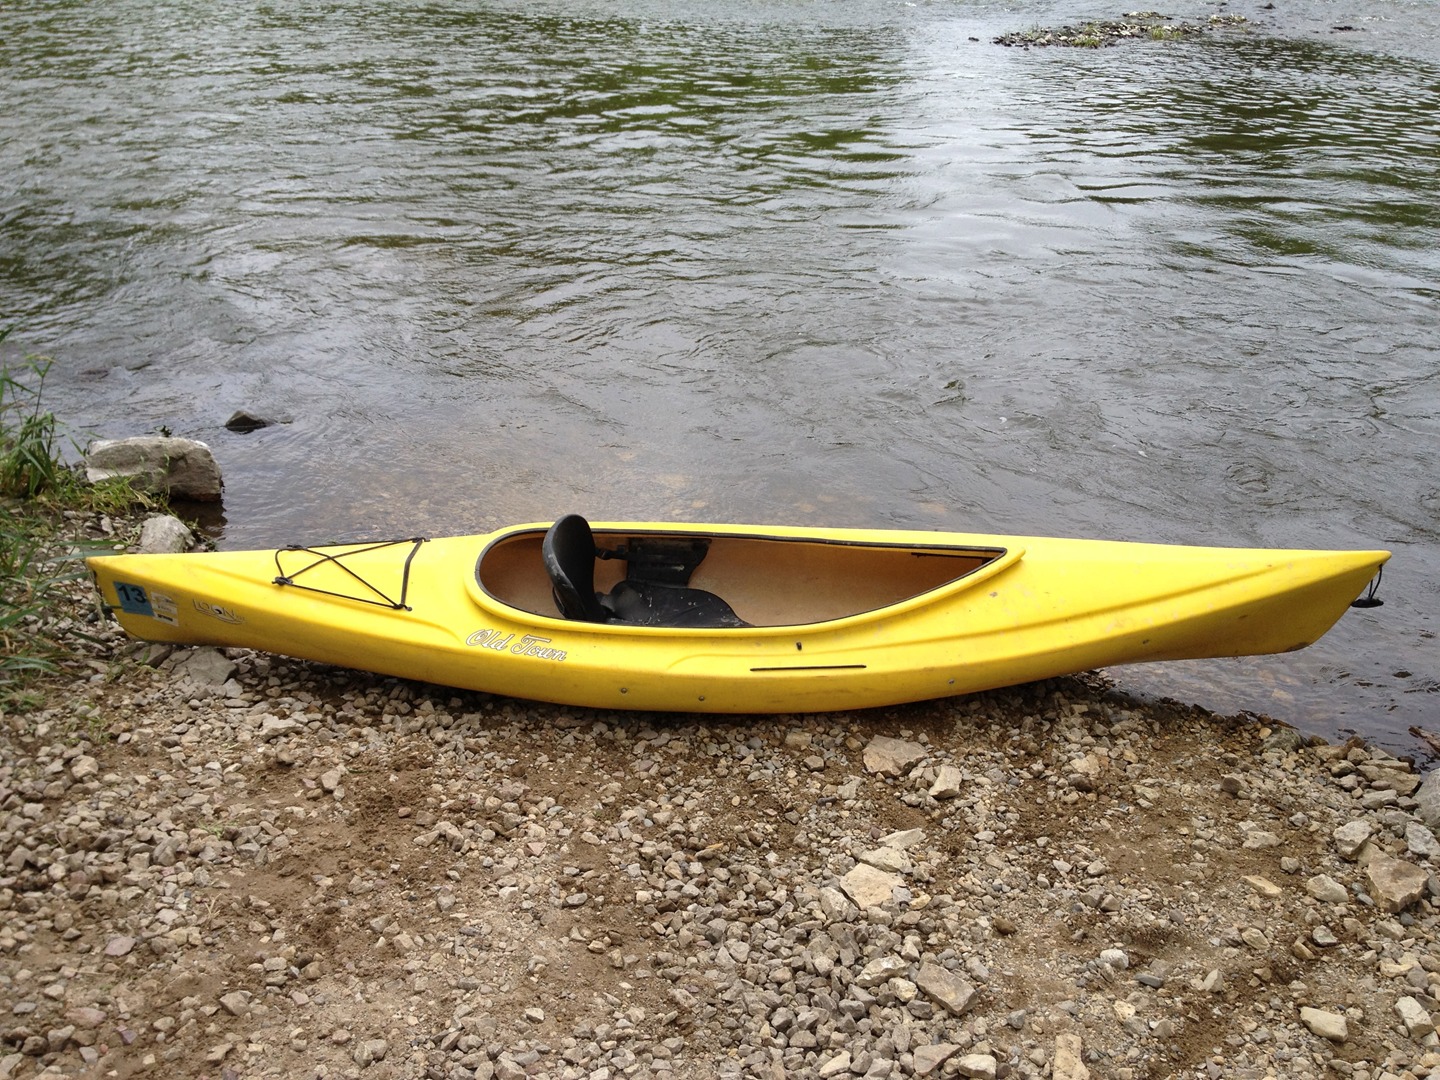 Paddlerscove - Kayaks and Accessories For Sale